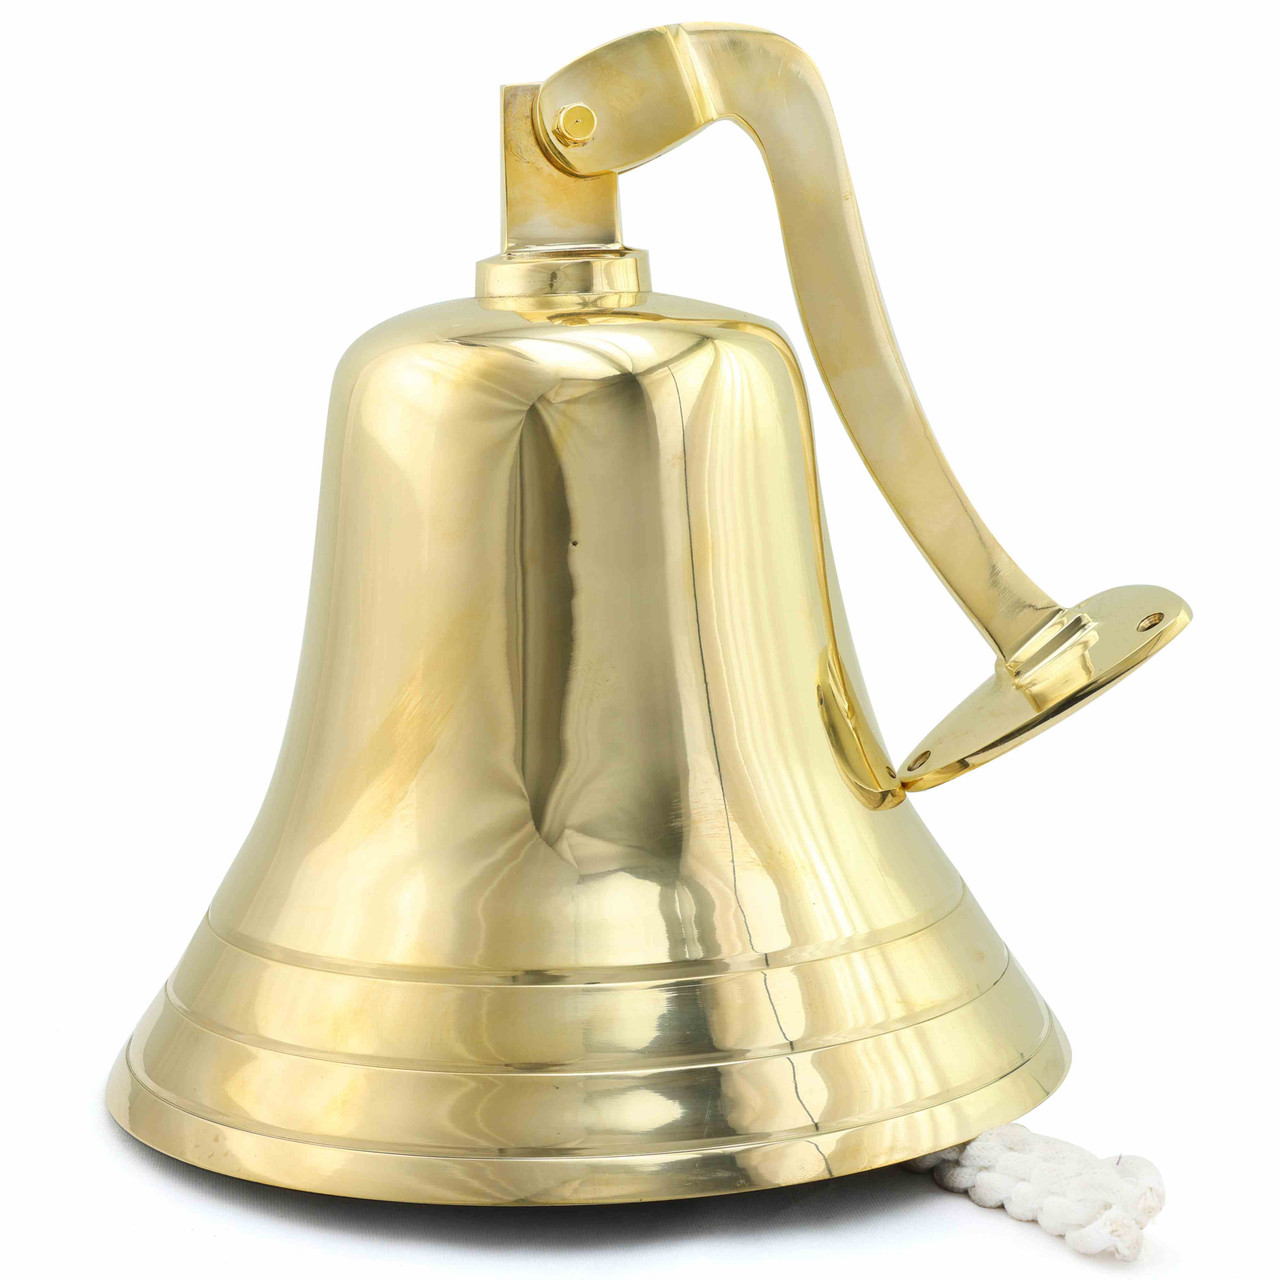 Ship's Bell - Solid Brass - 13"